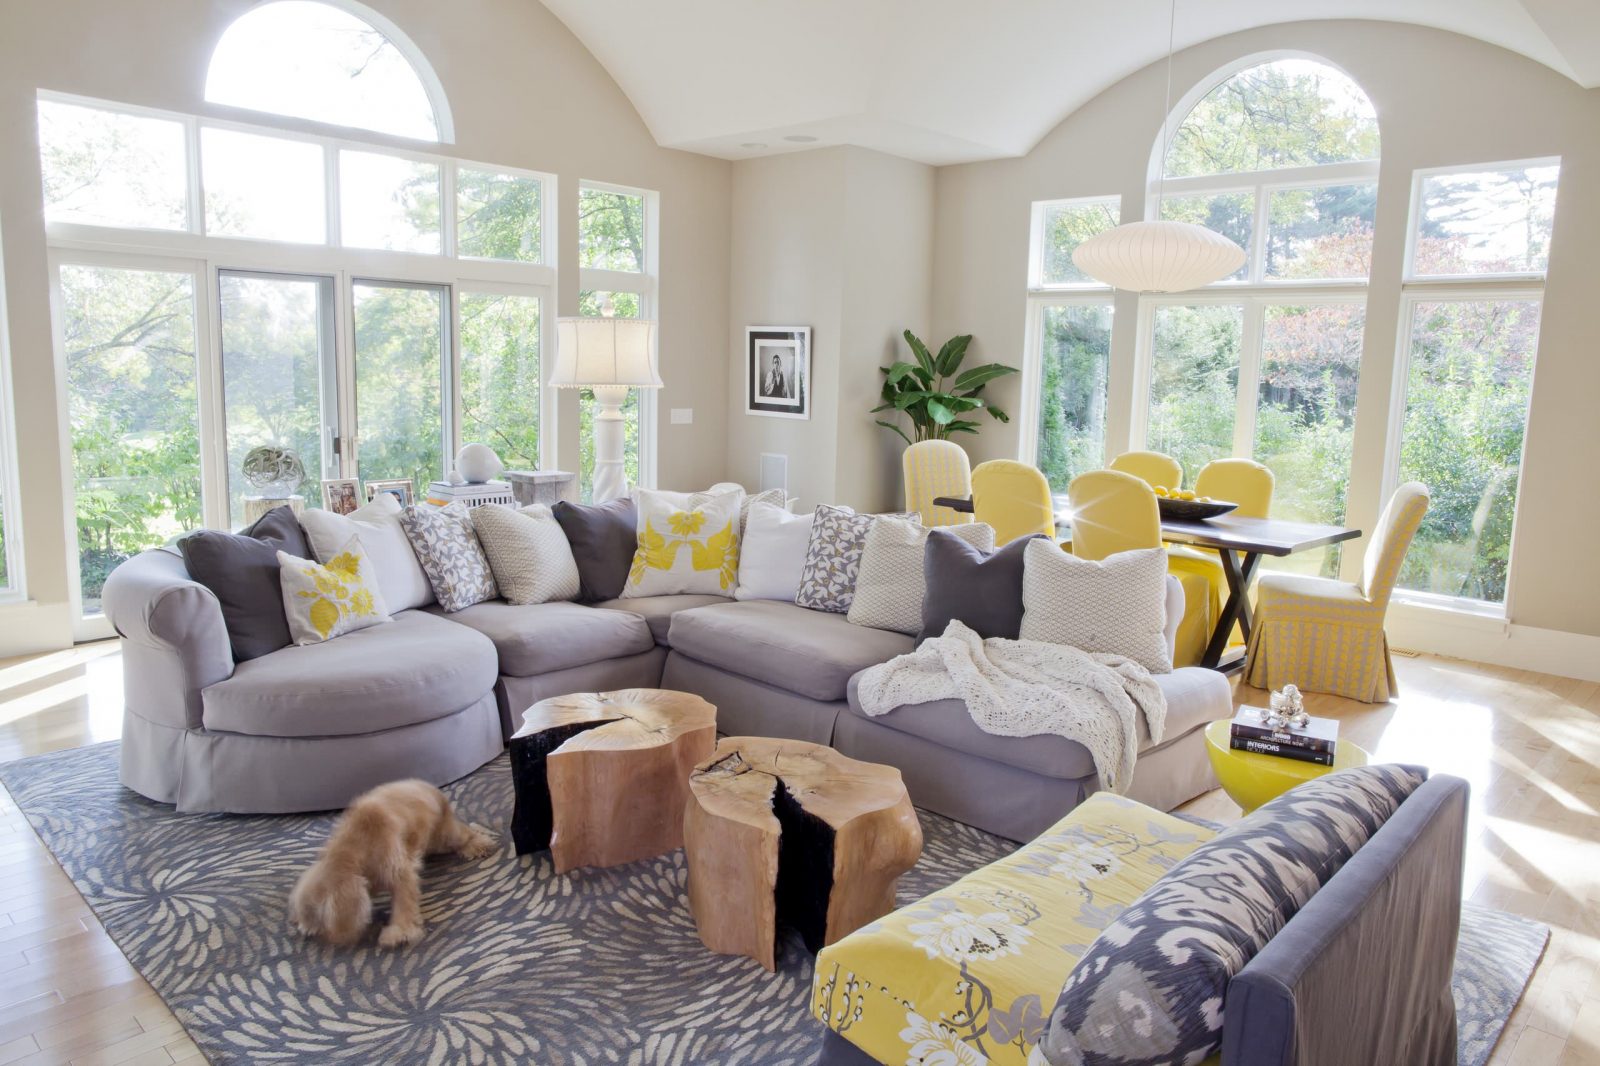 11 Most Stunning Grey And Yellow Living, Living Room Ideas Grey And Yellow